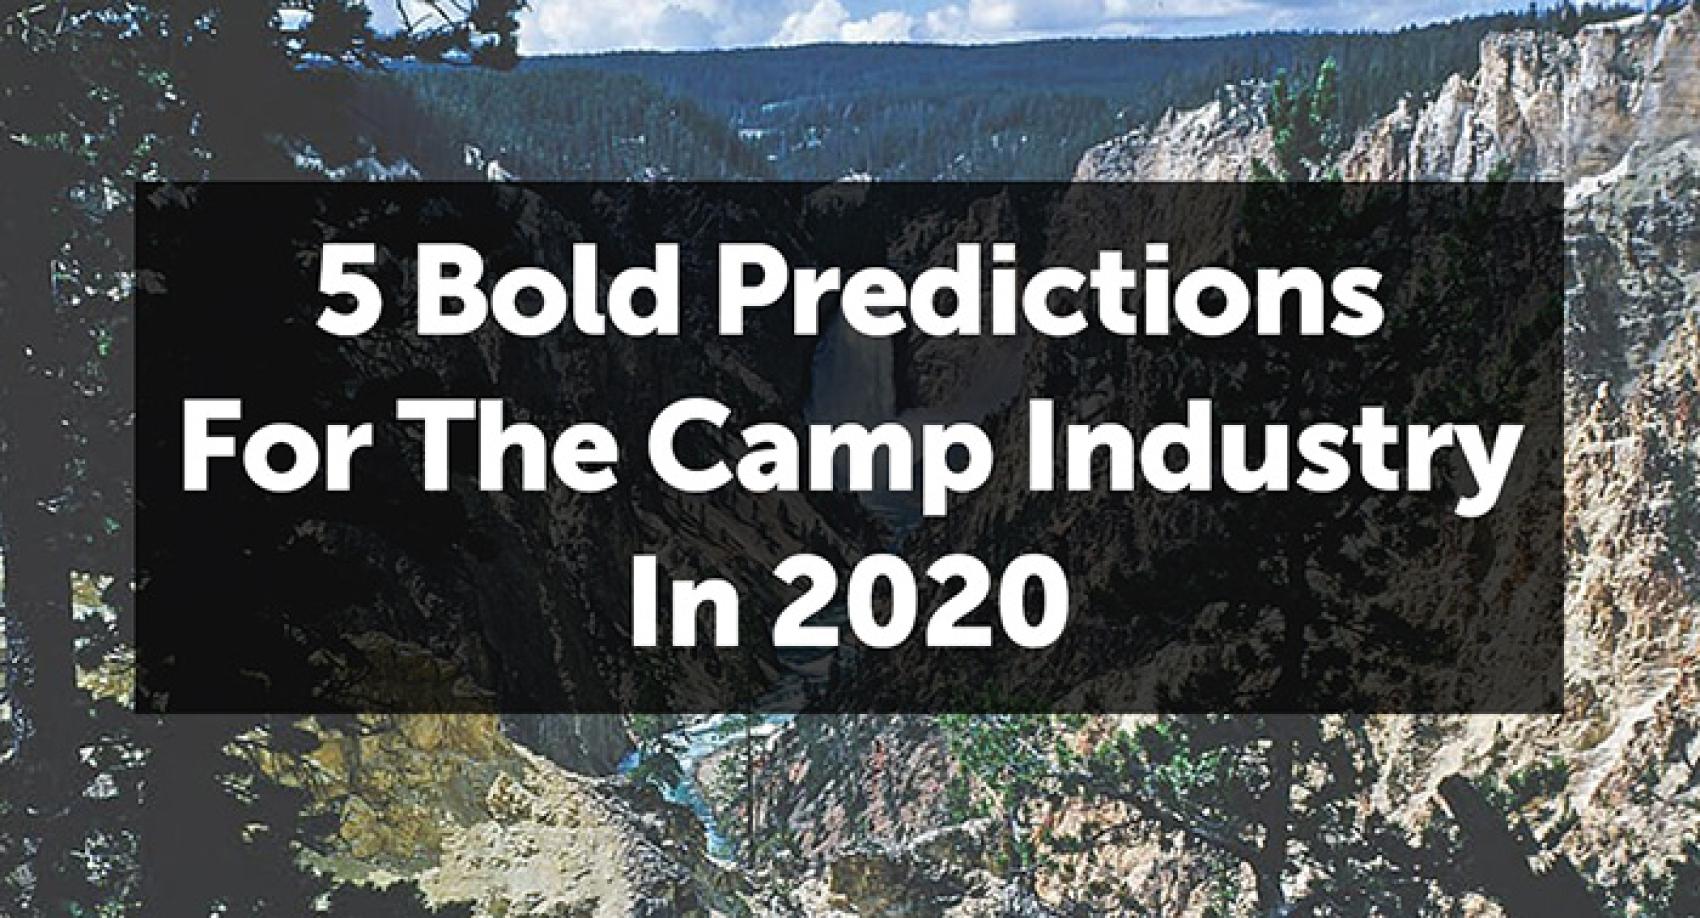 5 Bold Predictions for the Camp Industry in 2020